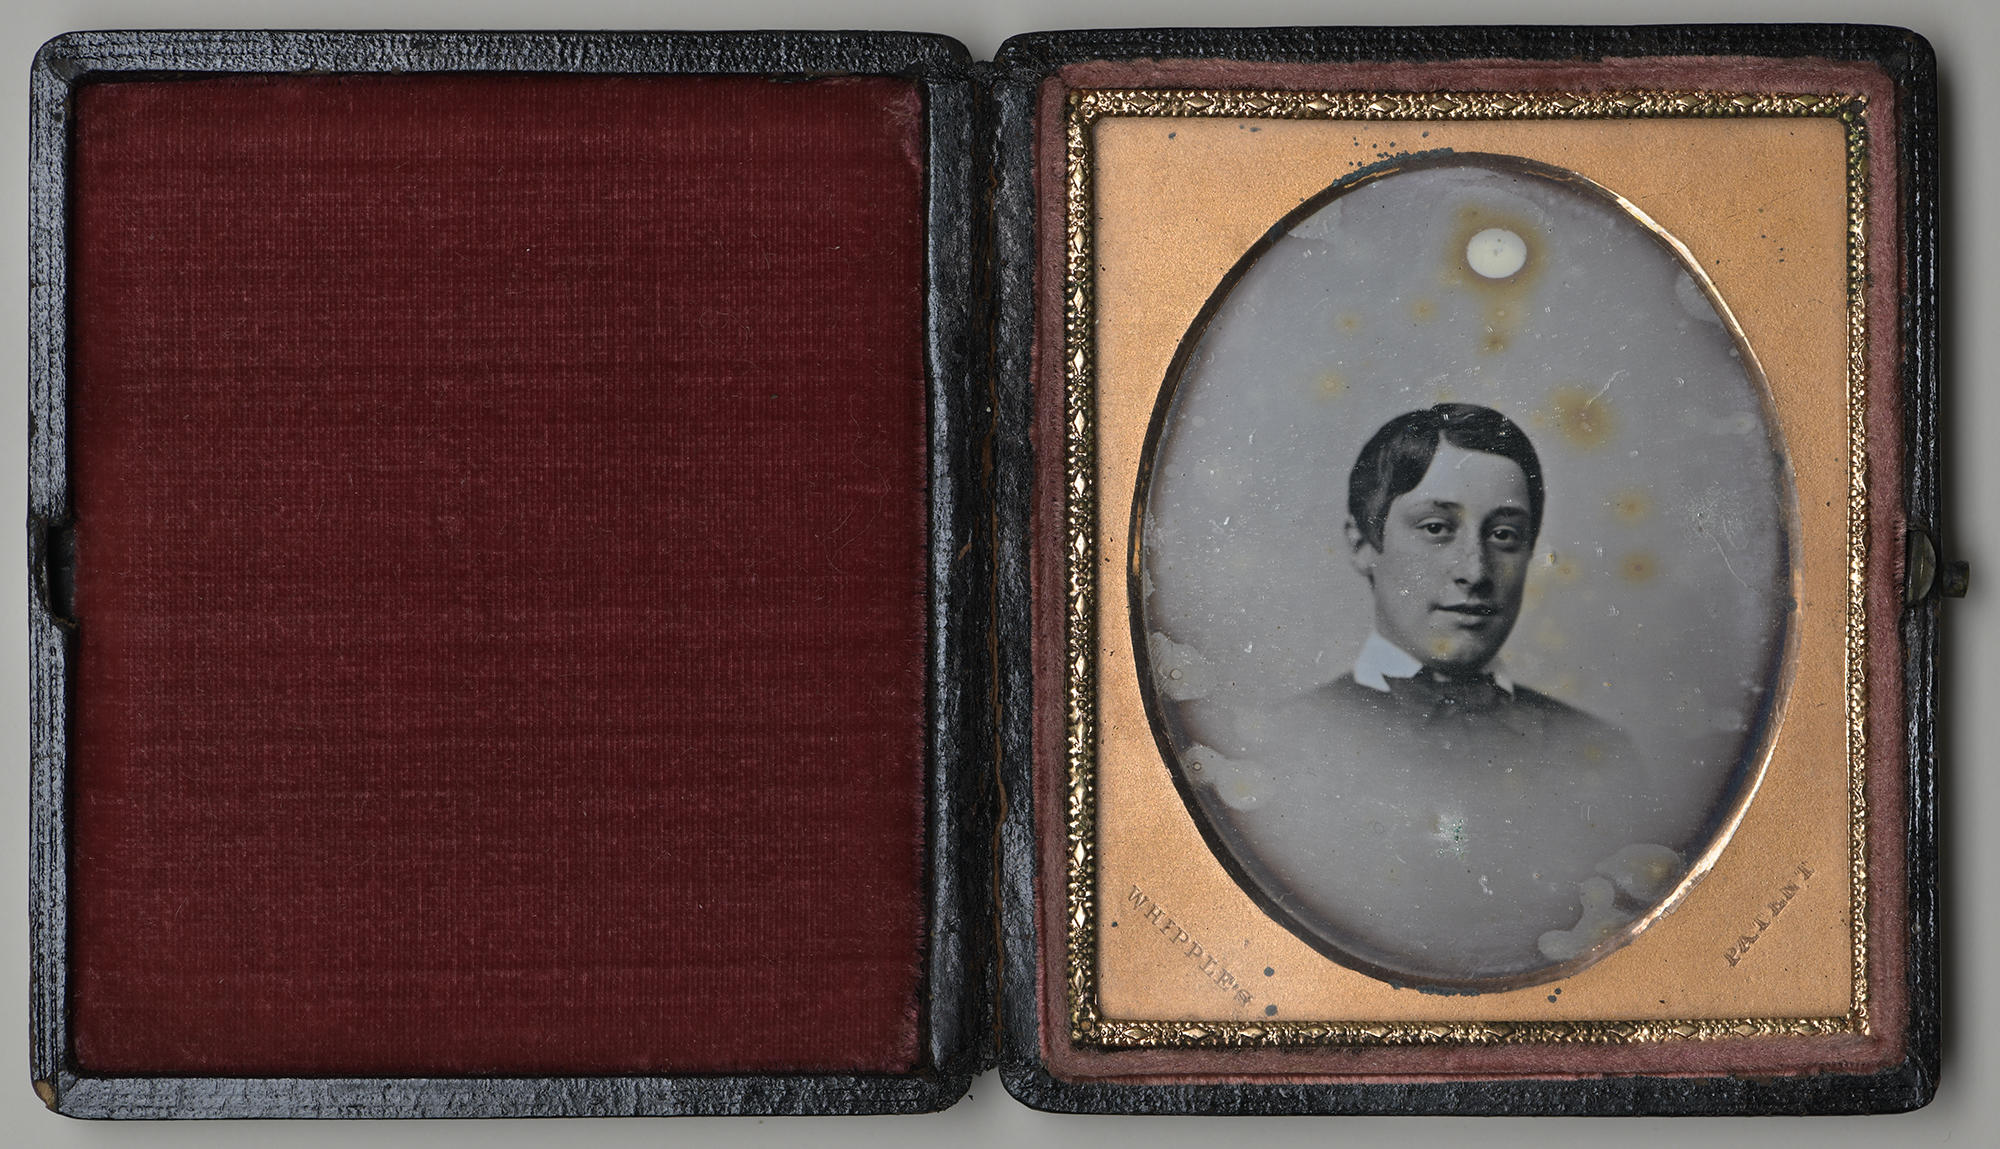 An open case lined with red velvet contains an oval black and white photograph of a boy about 12 years old identified as John L. Gardner, Jr.  He is dressed in 19th century attire.